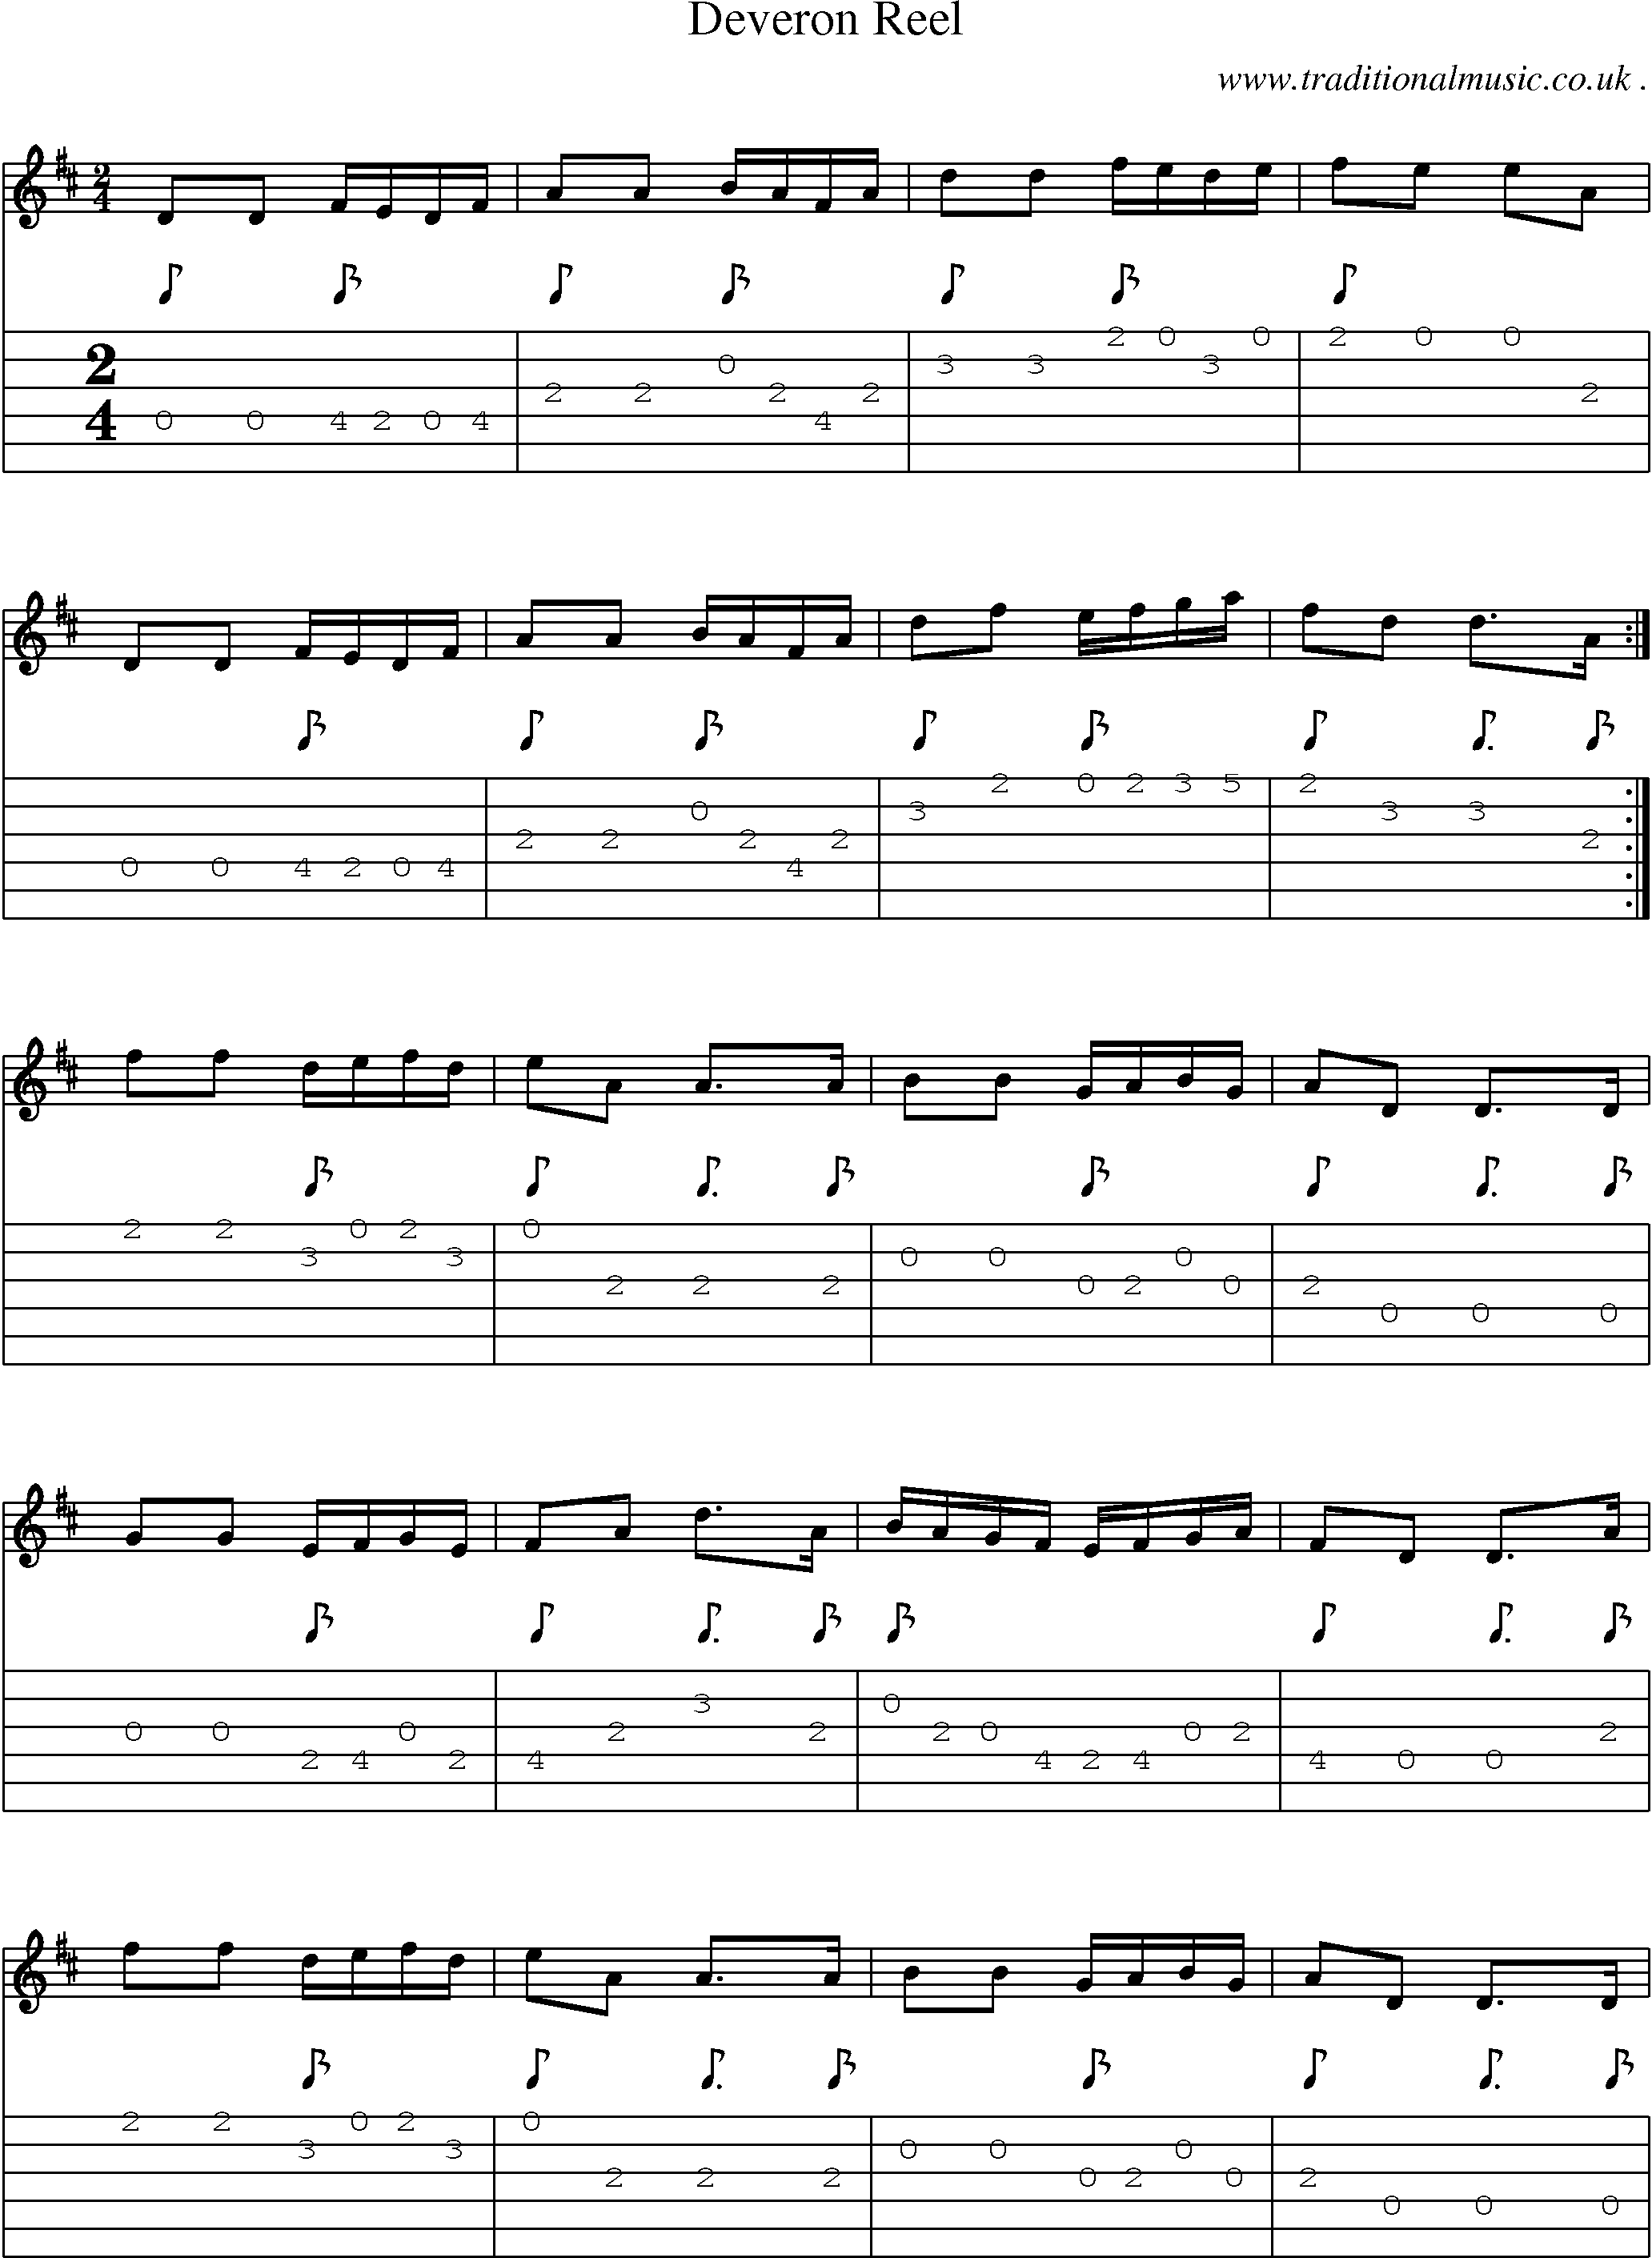 Sheet-music  score, Chords and Guitar Tabs for Deveron Reel